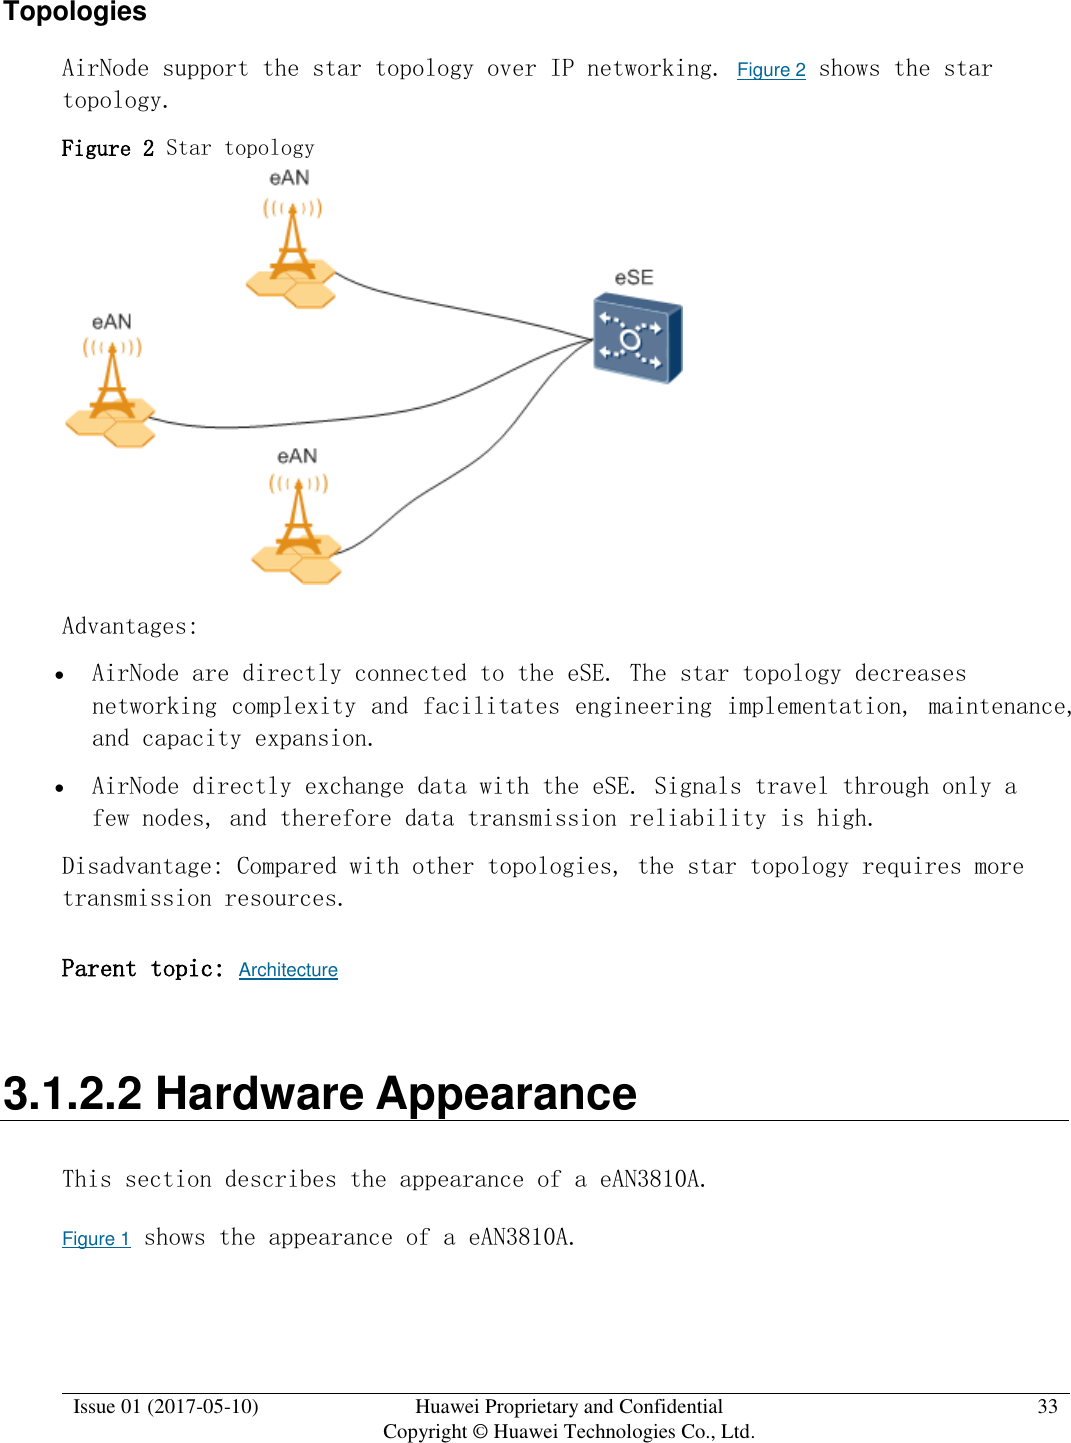  Issue 01 (2017-05-10) Huawei Proprietary and Confidential      Copyright © Huawei Technologies Co., Ltd. 33  Topologies AirNode support the star topology over IP networking. Figure 2 shows the star topology.  Figure 2 Star topology   Advantages:   AirNode are directly connected to the eSE. The star topology decreases networking complexity and facilitates engineering implementation, maintenance, and capacity expansion.  AirNode directly exchange data with the eSE. Signals travel through only a few nodes, and therefore data transmission reliability is high. Disadvantage: Compared with other topologies, the star topology requires more transmission resources.  Parent topic: Architecture 3.1.2.2 Hardware Appearance This section describes the appearance of a eAN3810A. Figure 1 shows the appearance of a eAN3810A. 